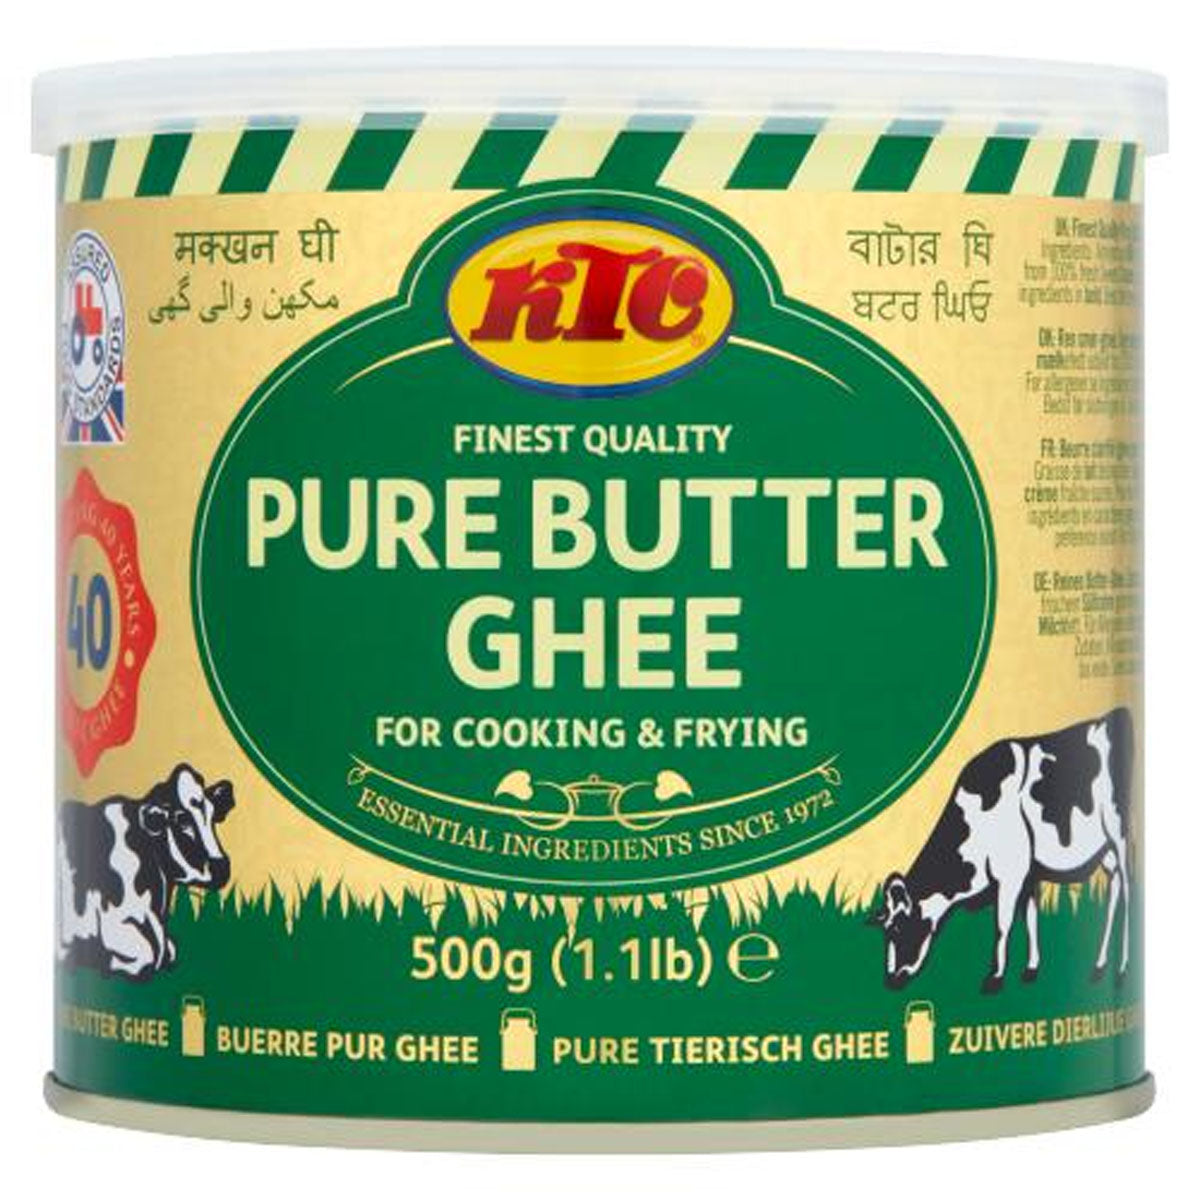 KTC - Finest Quality Pure Butter Ghee - 500g - Continental Food Store